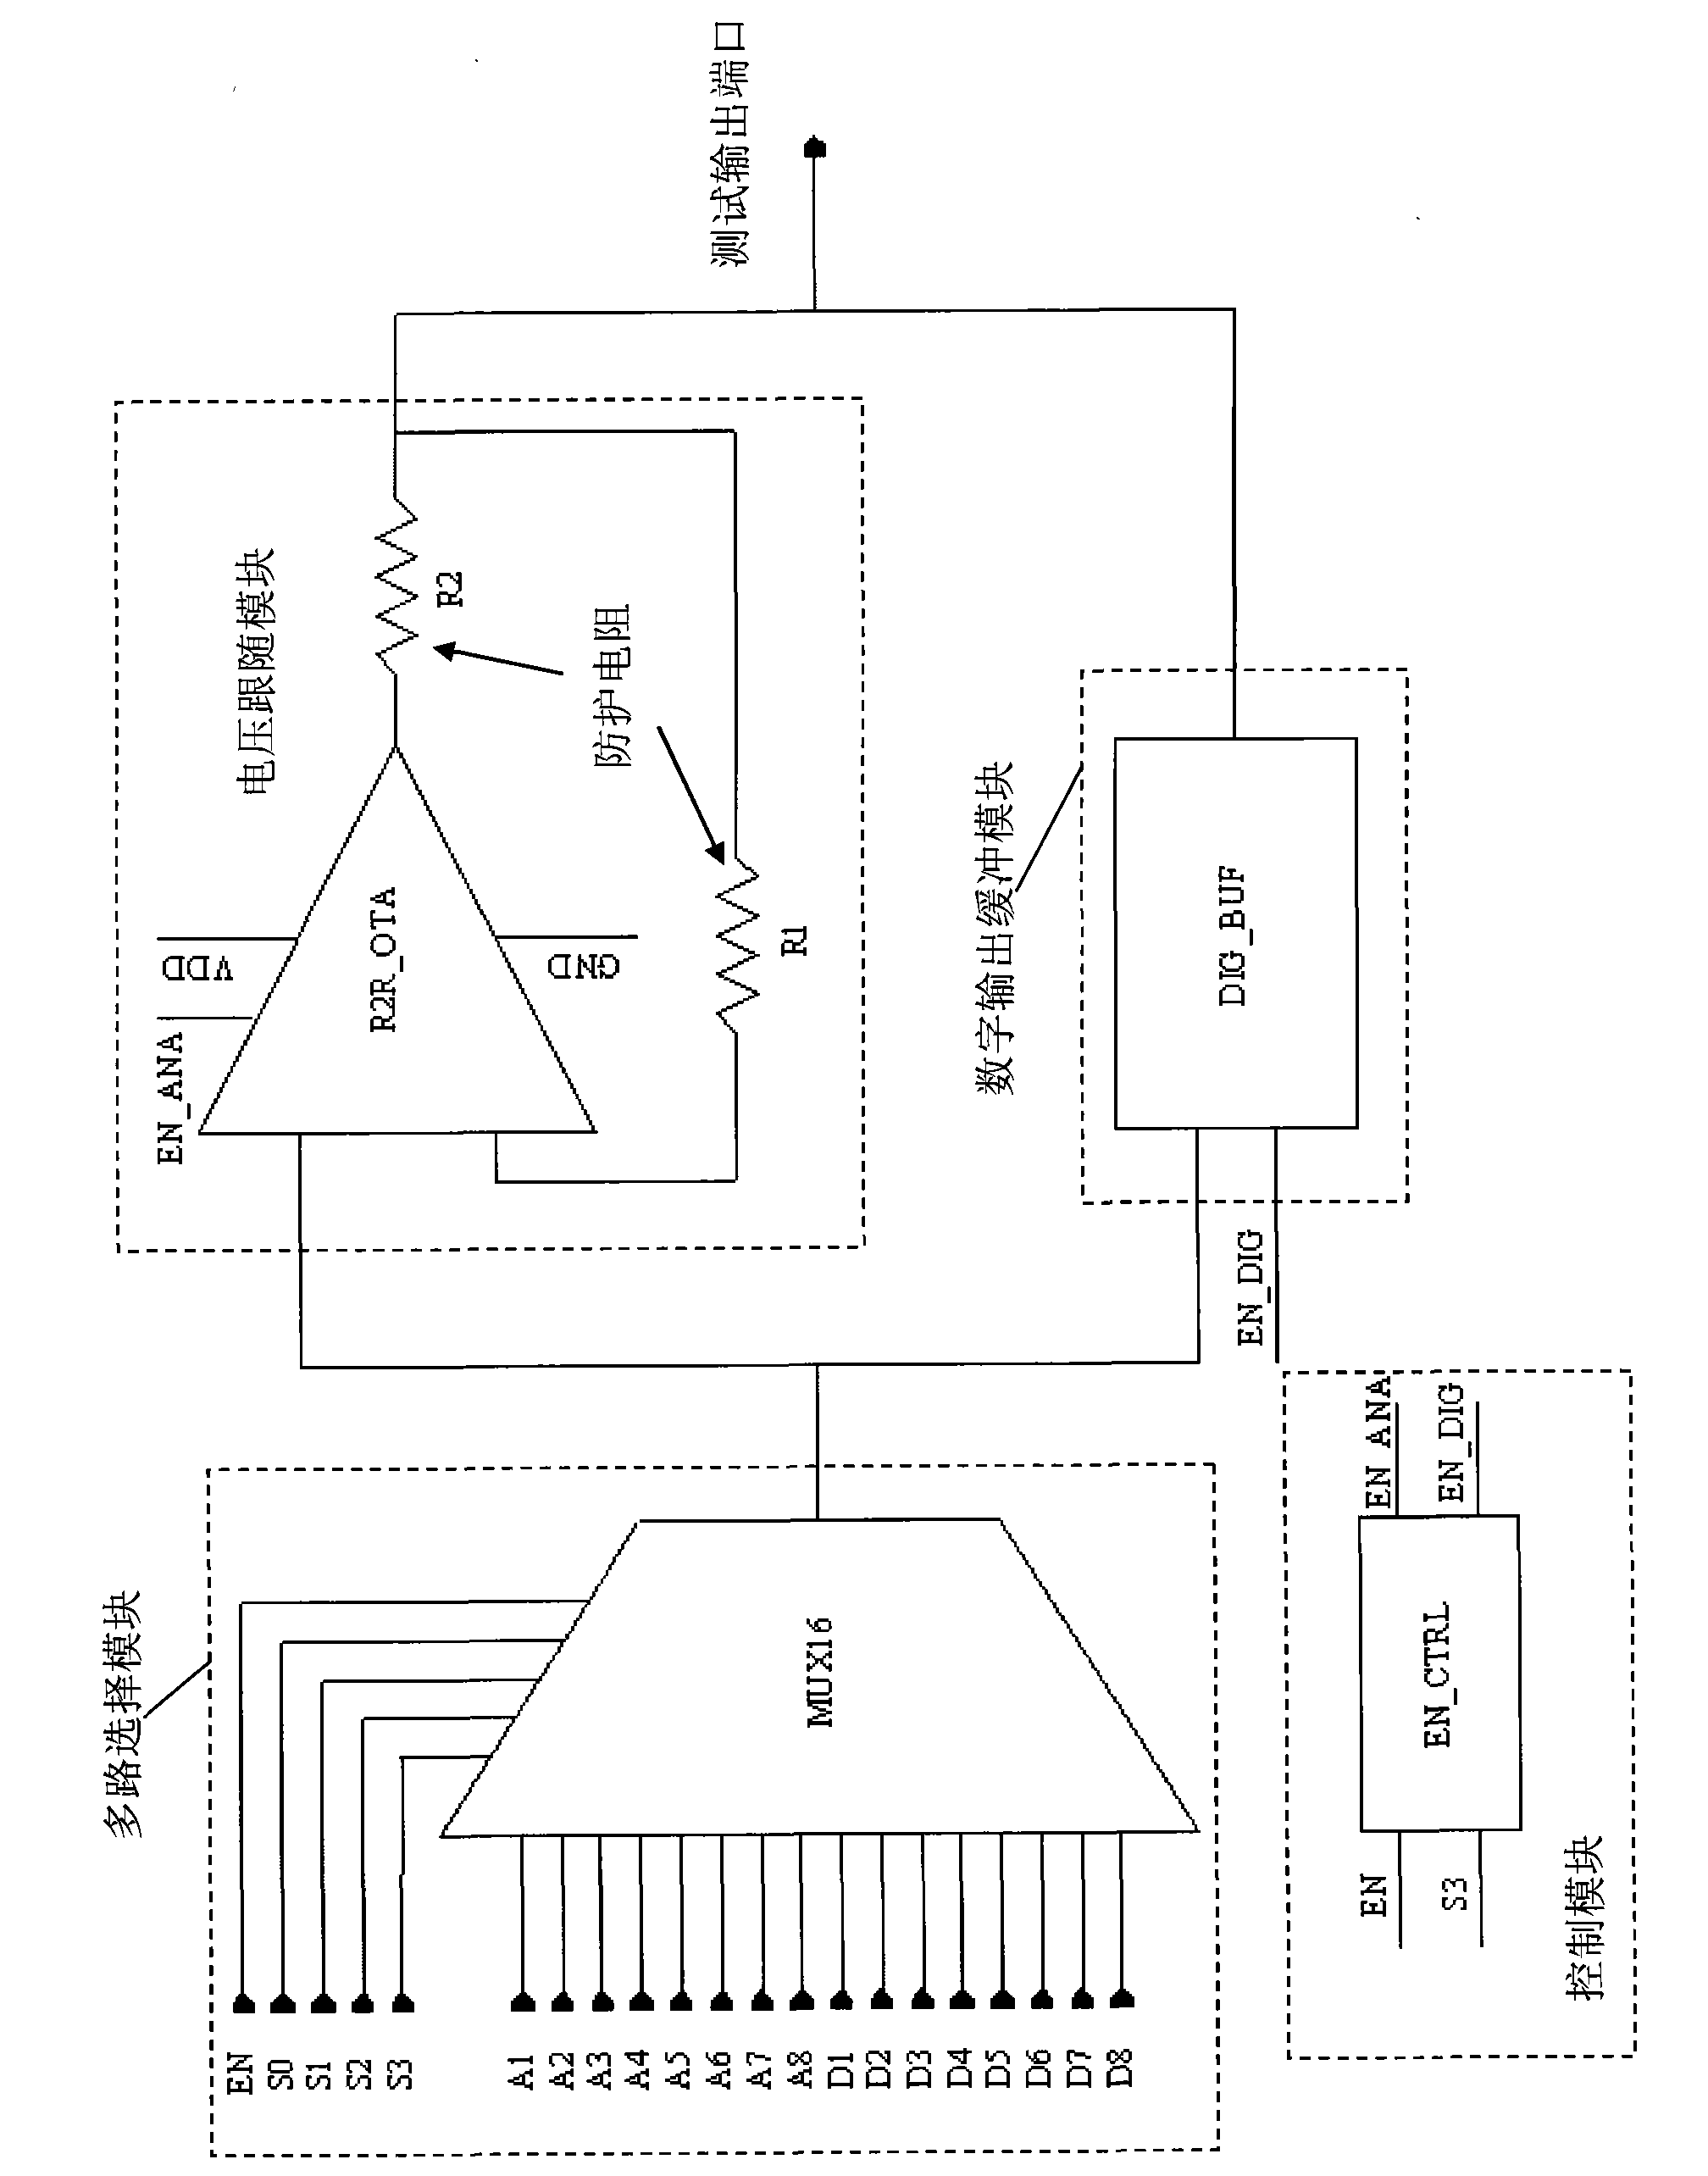 Testability circuit for digital/analog mixed signal chip